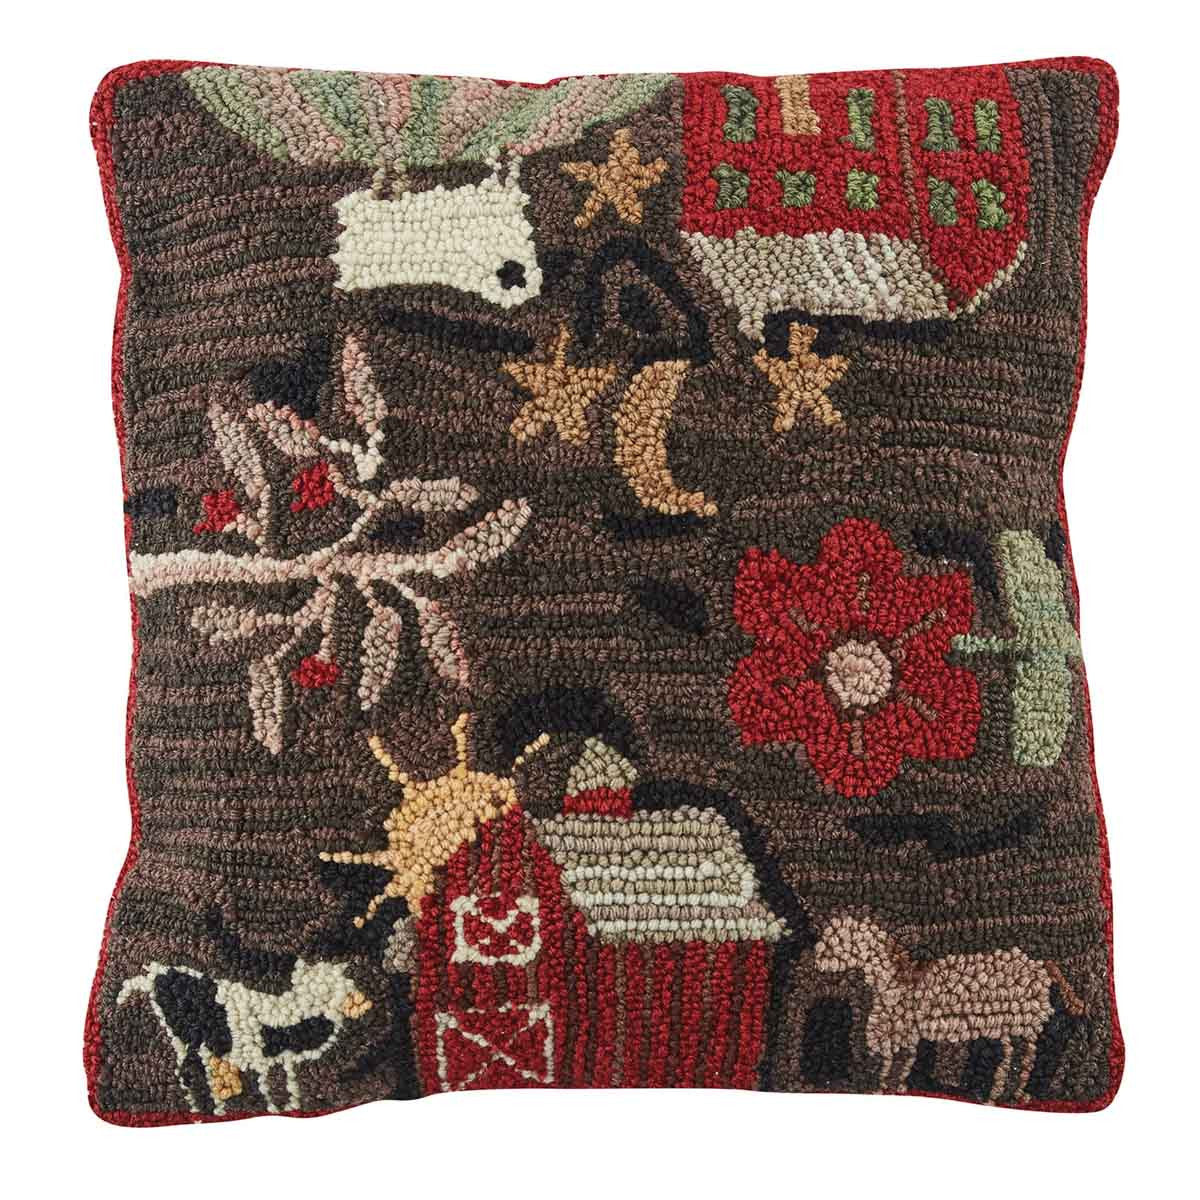 Farm Life Hooked Pillow Set Polyester Fill 18"x18" - Park Designs